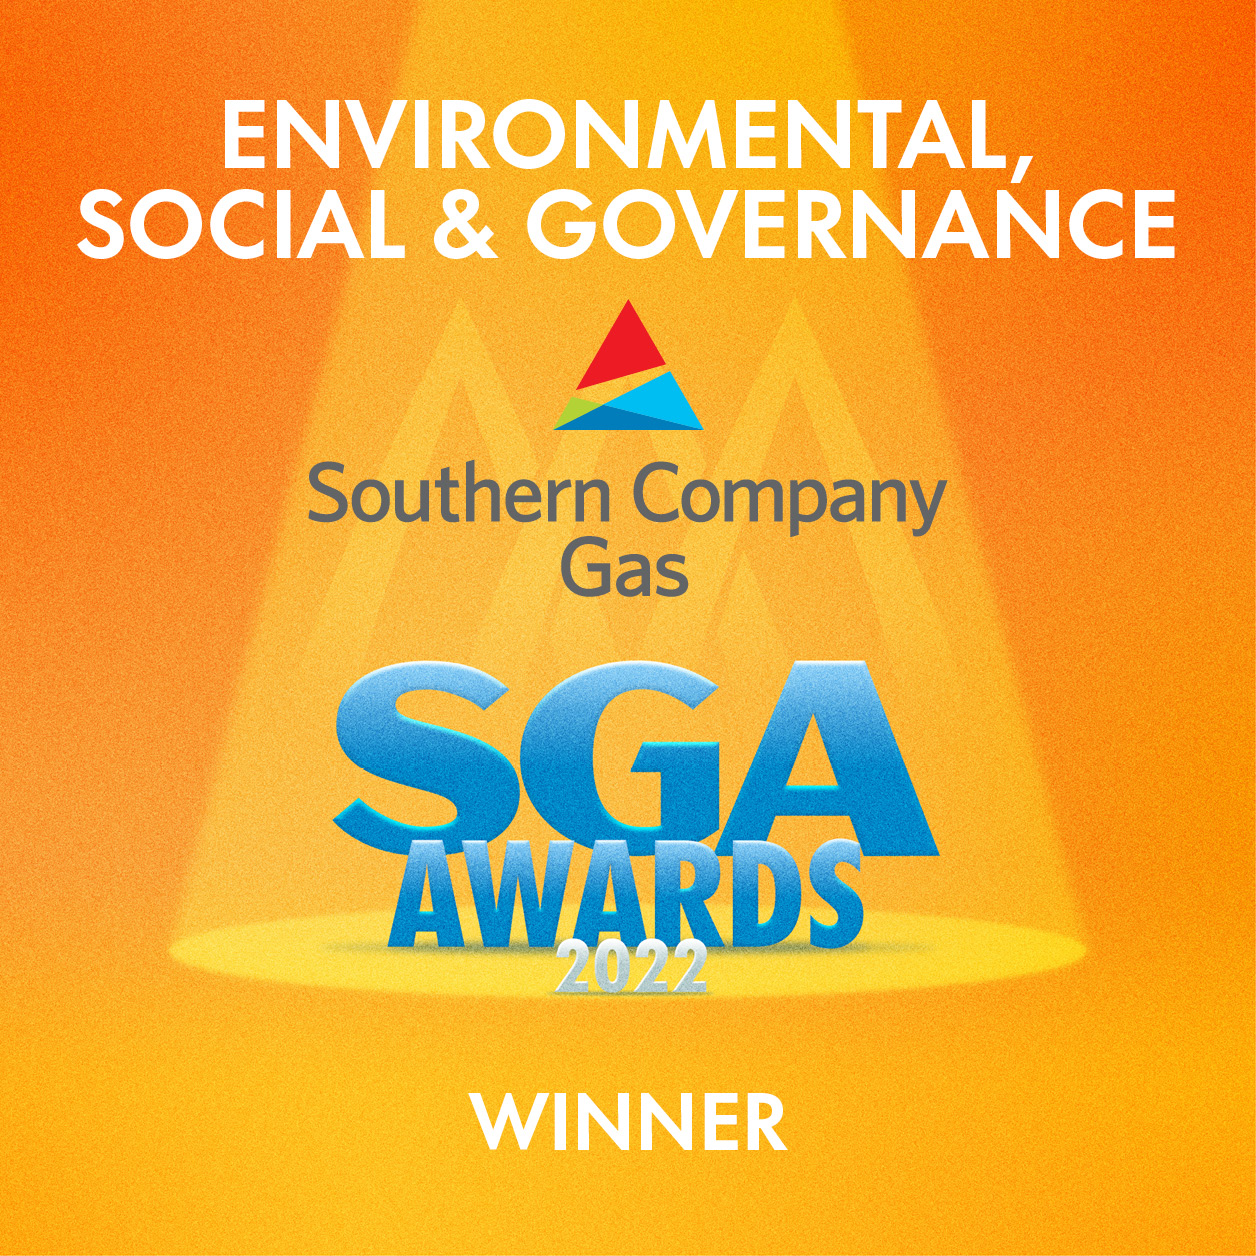 southern-company-gas-earns-top-industry-recognition-for-efforts-to